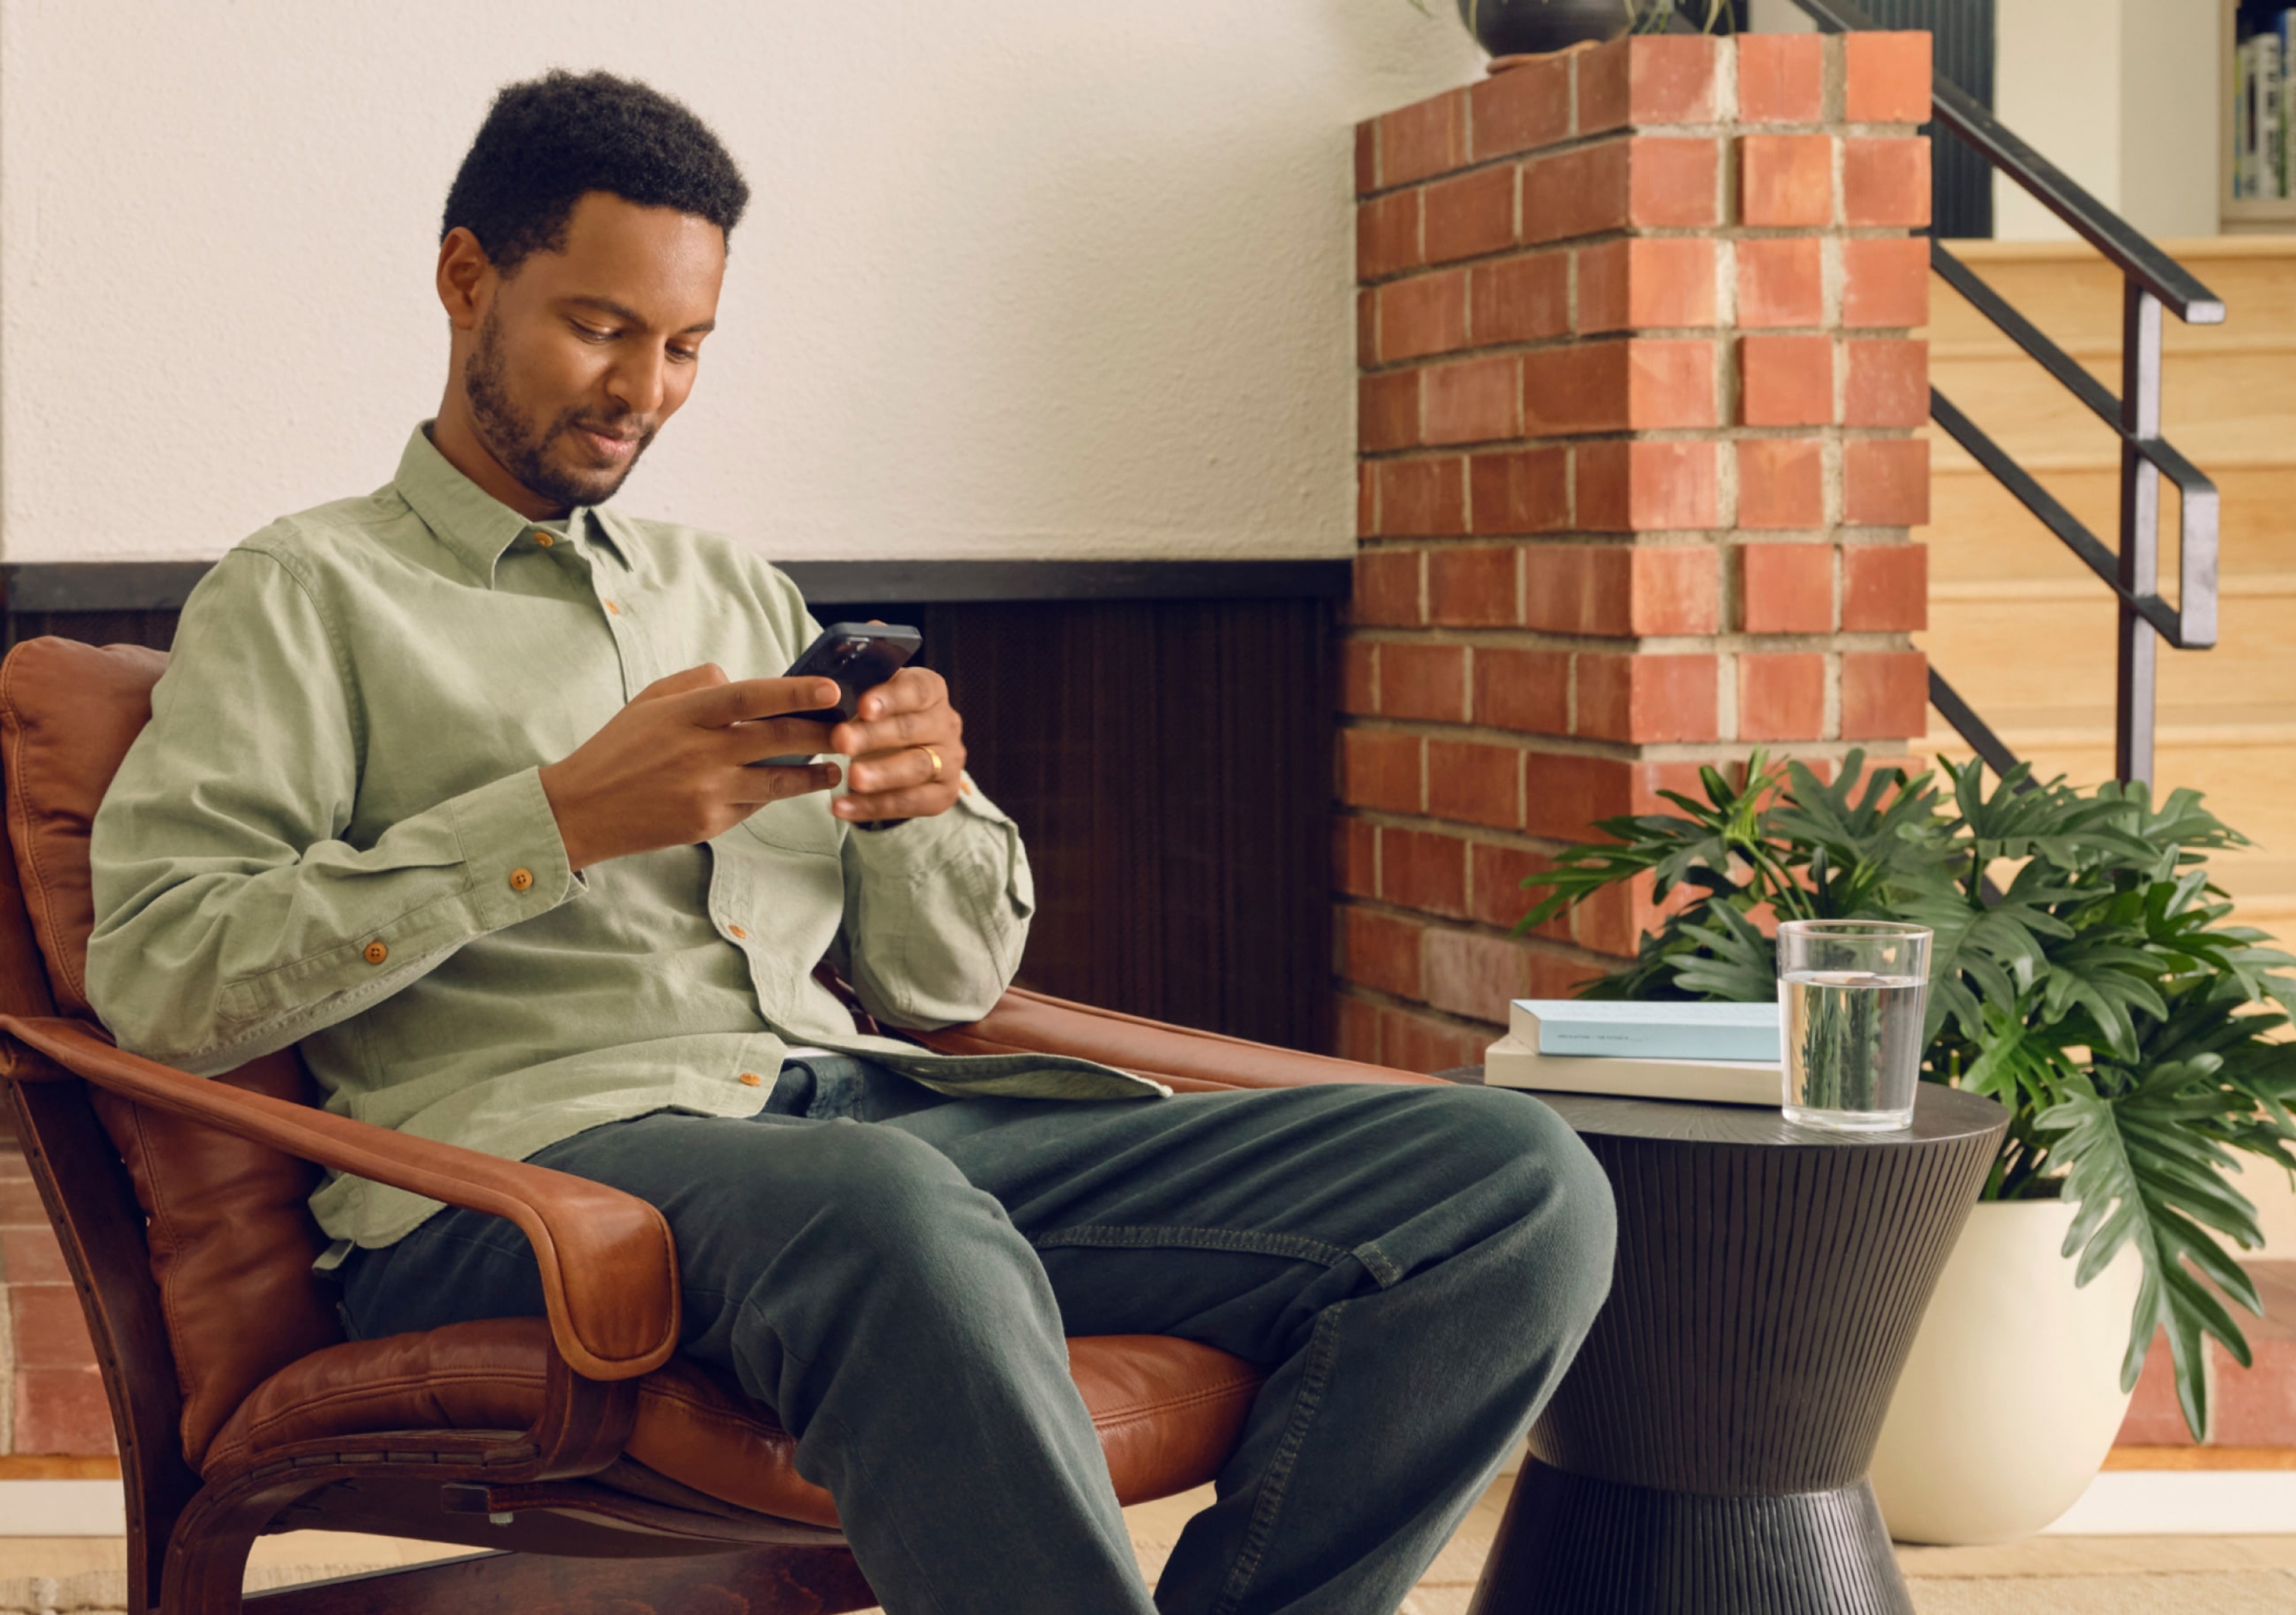 Sonos App user on the phone seated in living room